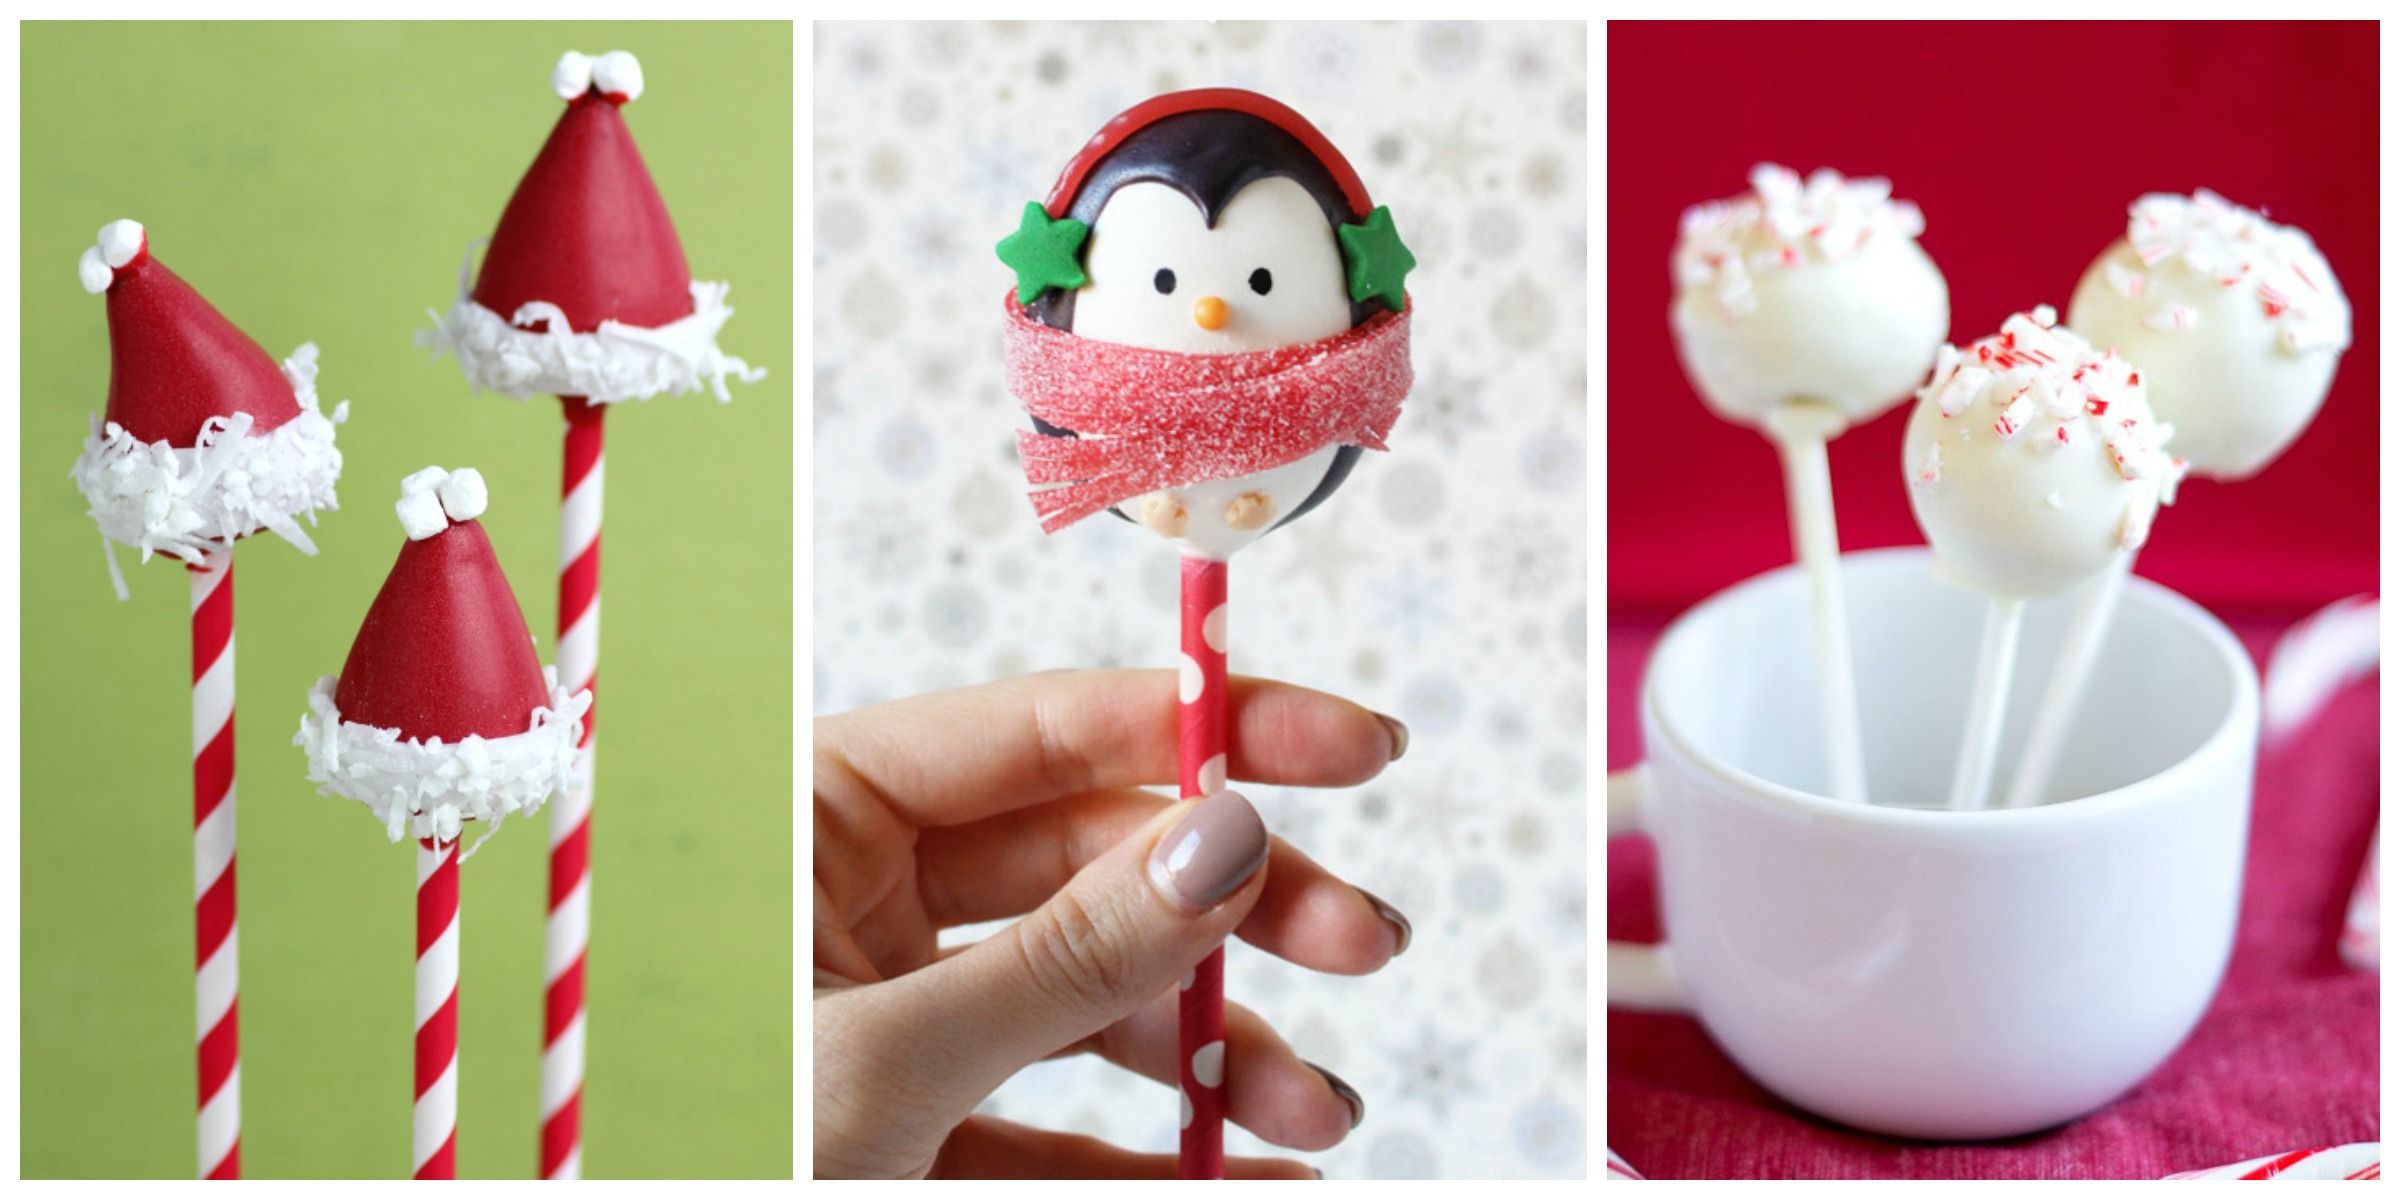 Winter Snowflake & Christmas Themed Cake Pops | Candy's Cake Pops